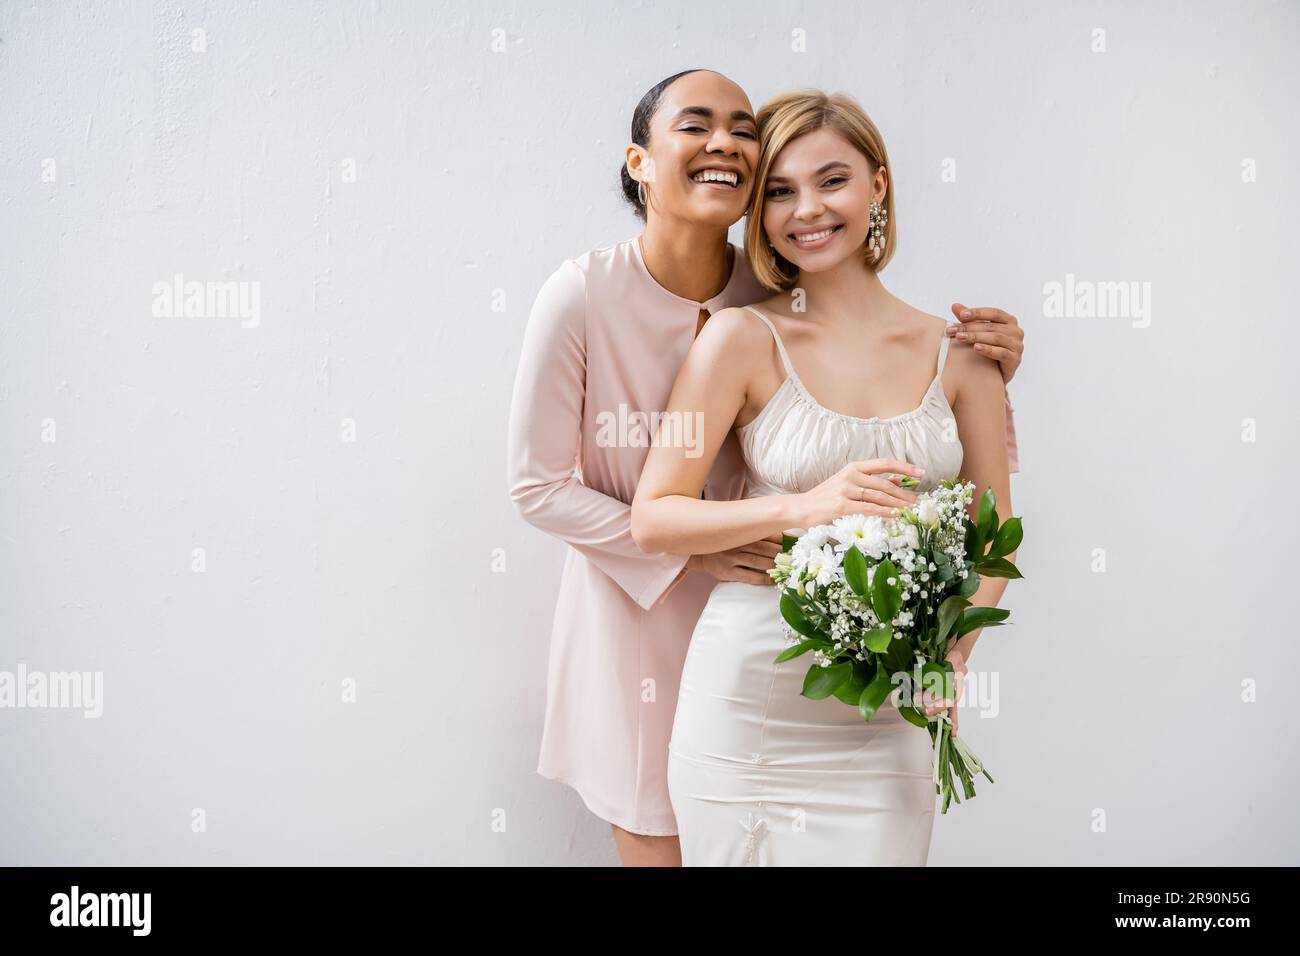 bridal shower, happy bride with bridesmaid, cheerful interracial women, wedding dress and bridesmaid gown, positive african american woman hugging eng Stock Photo